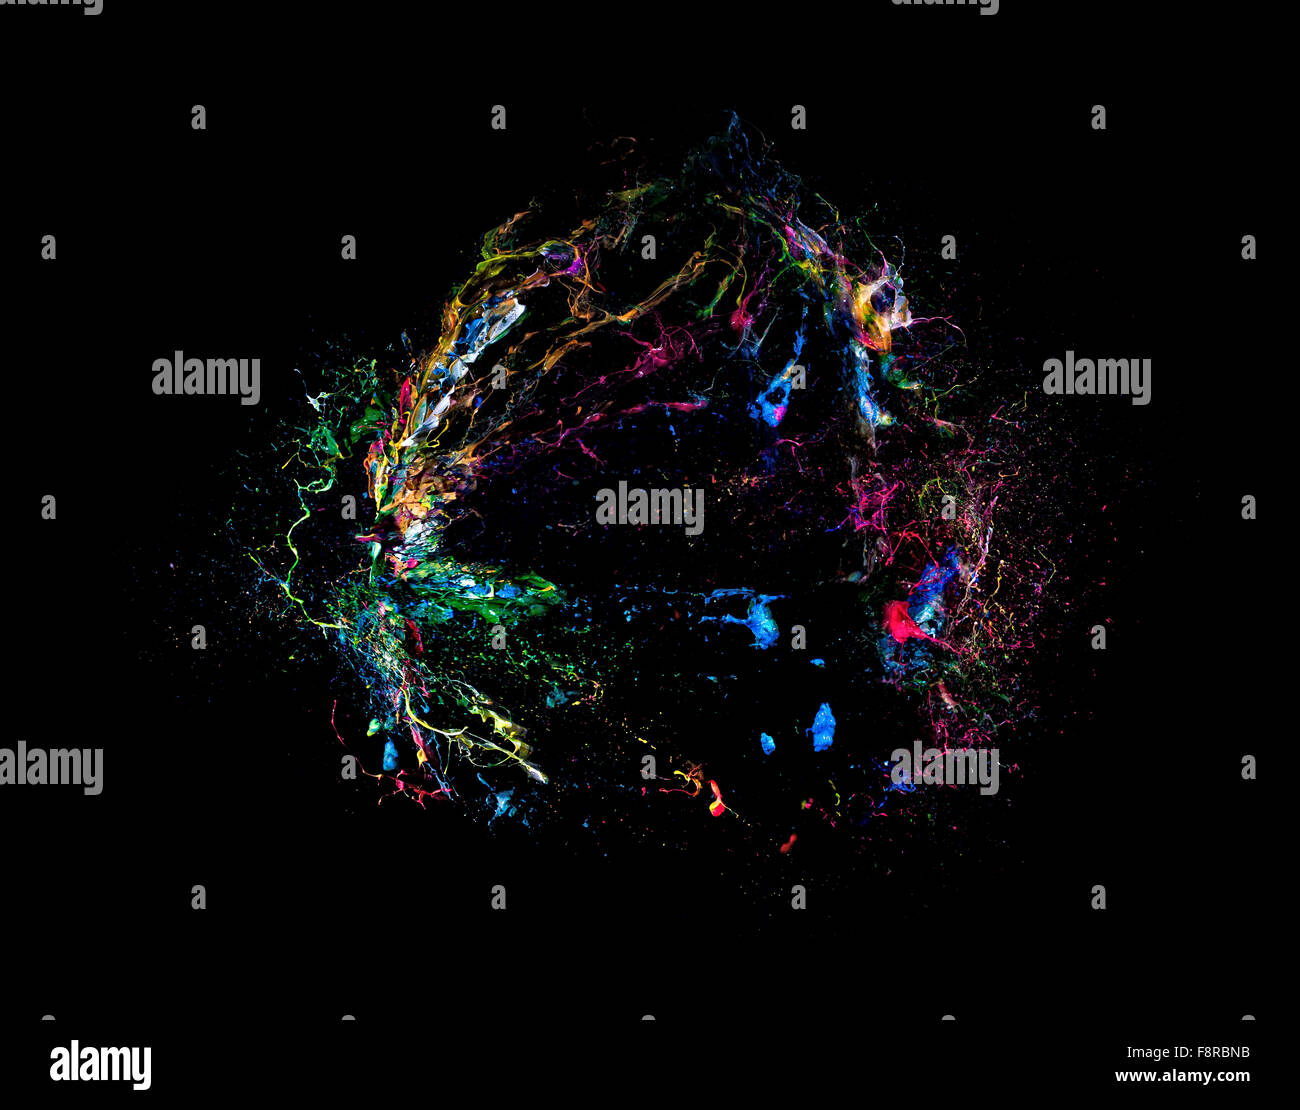 explosion of colorful paint on black background Stock Photo